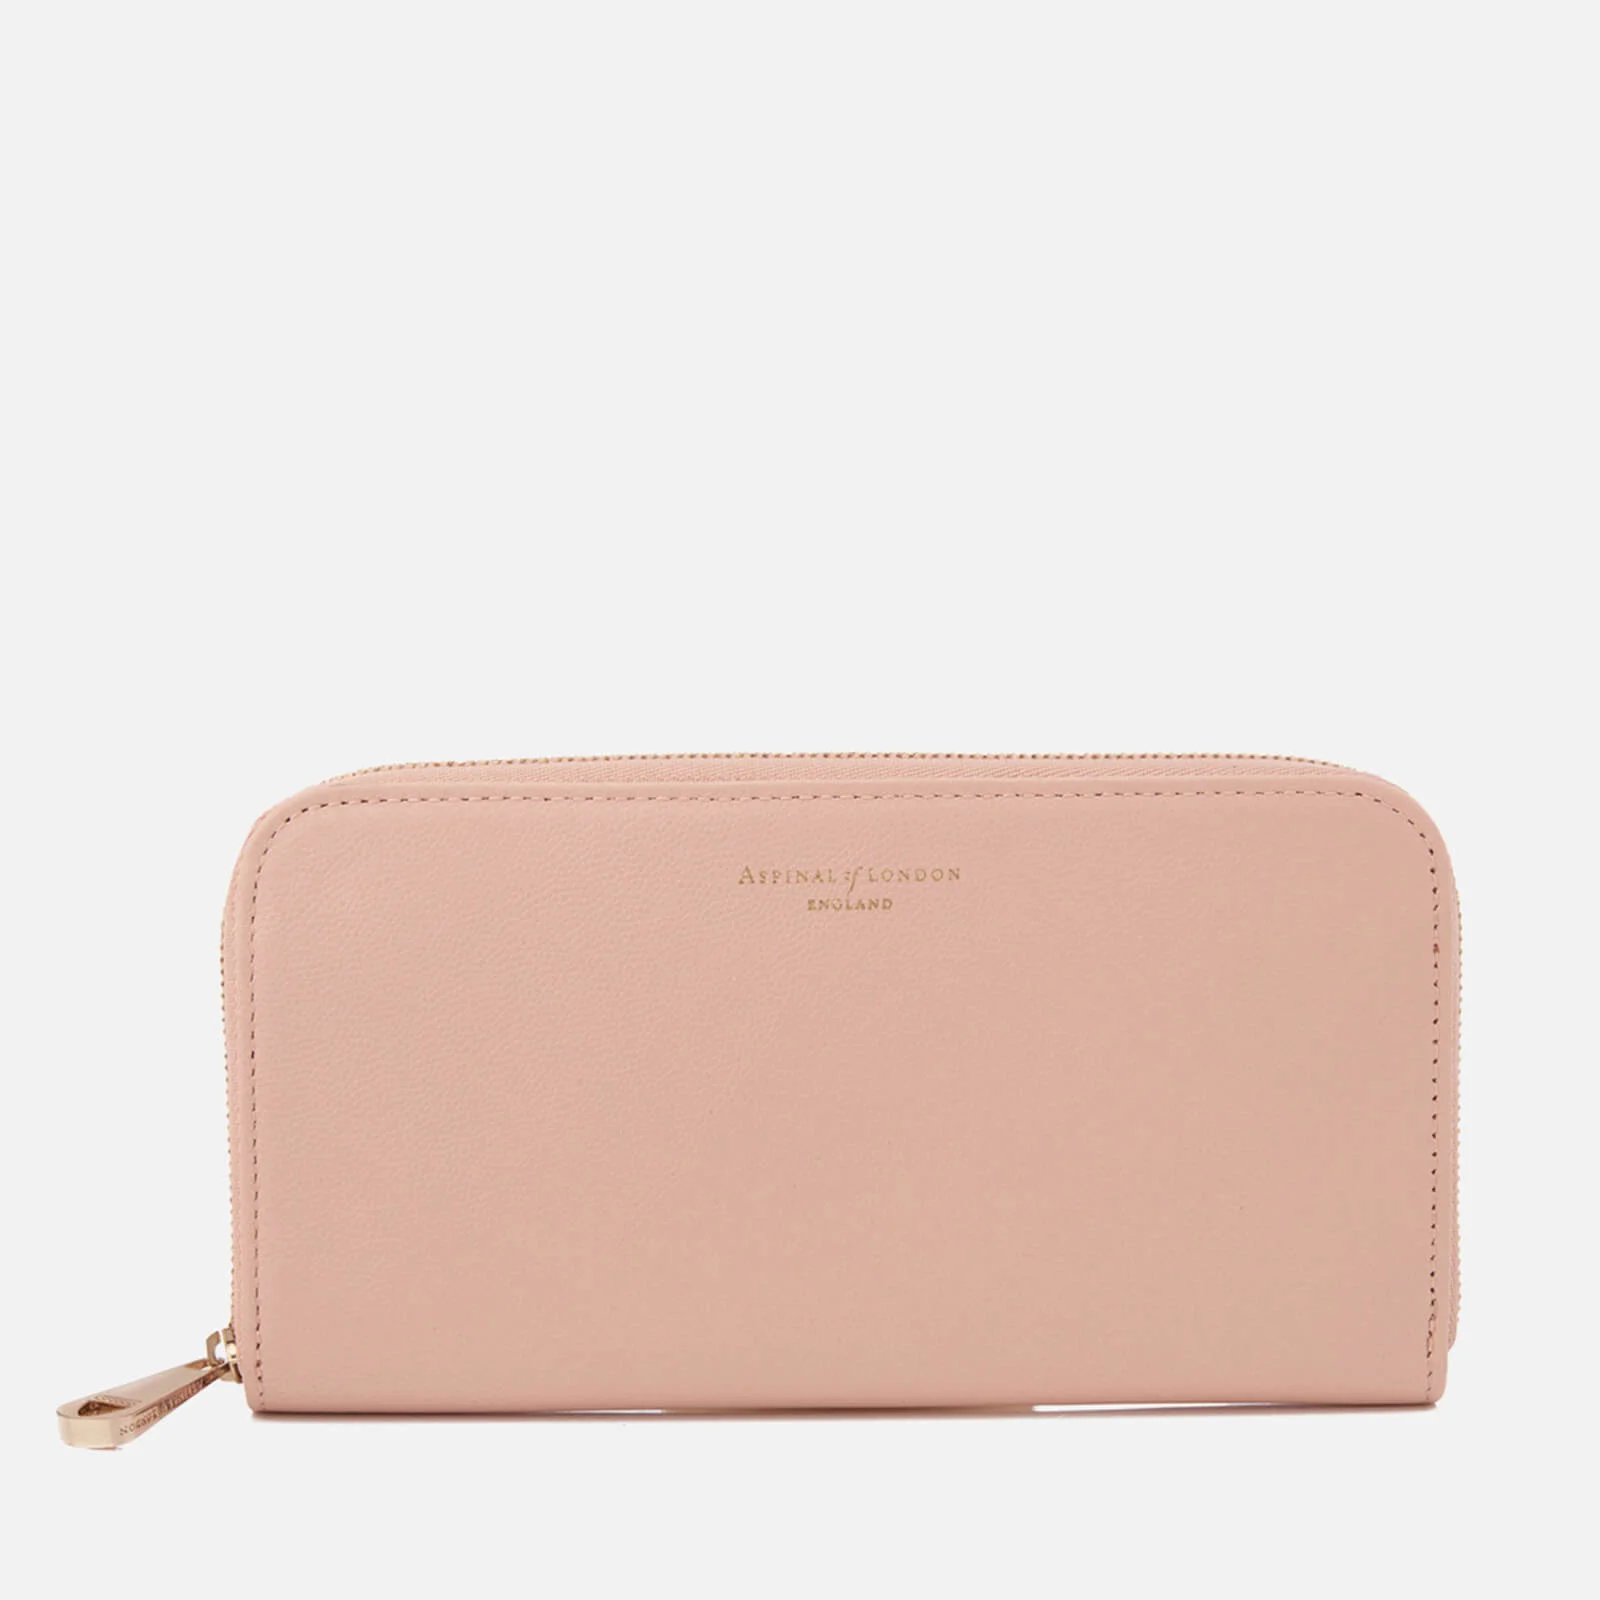 Aspinal of London Women's Continental Clutch Wallet - Peach Gold Image 1